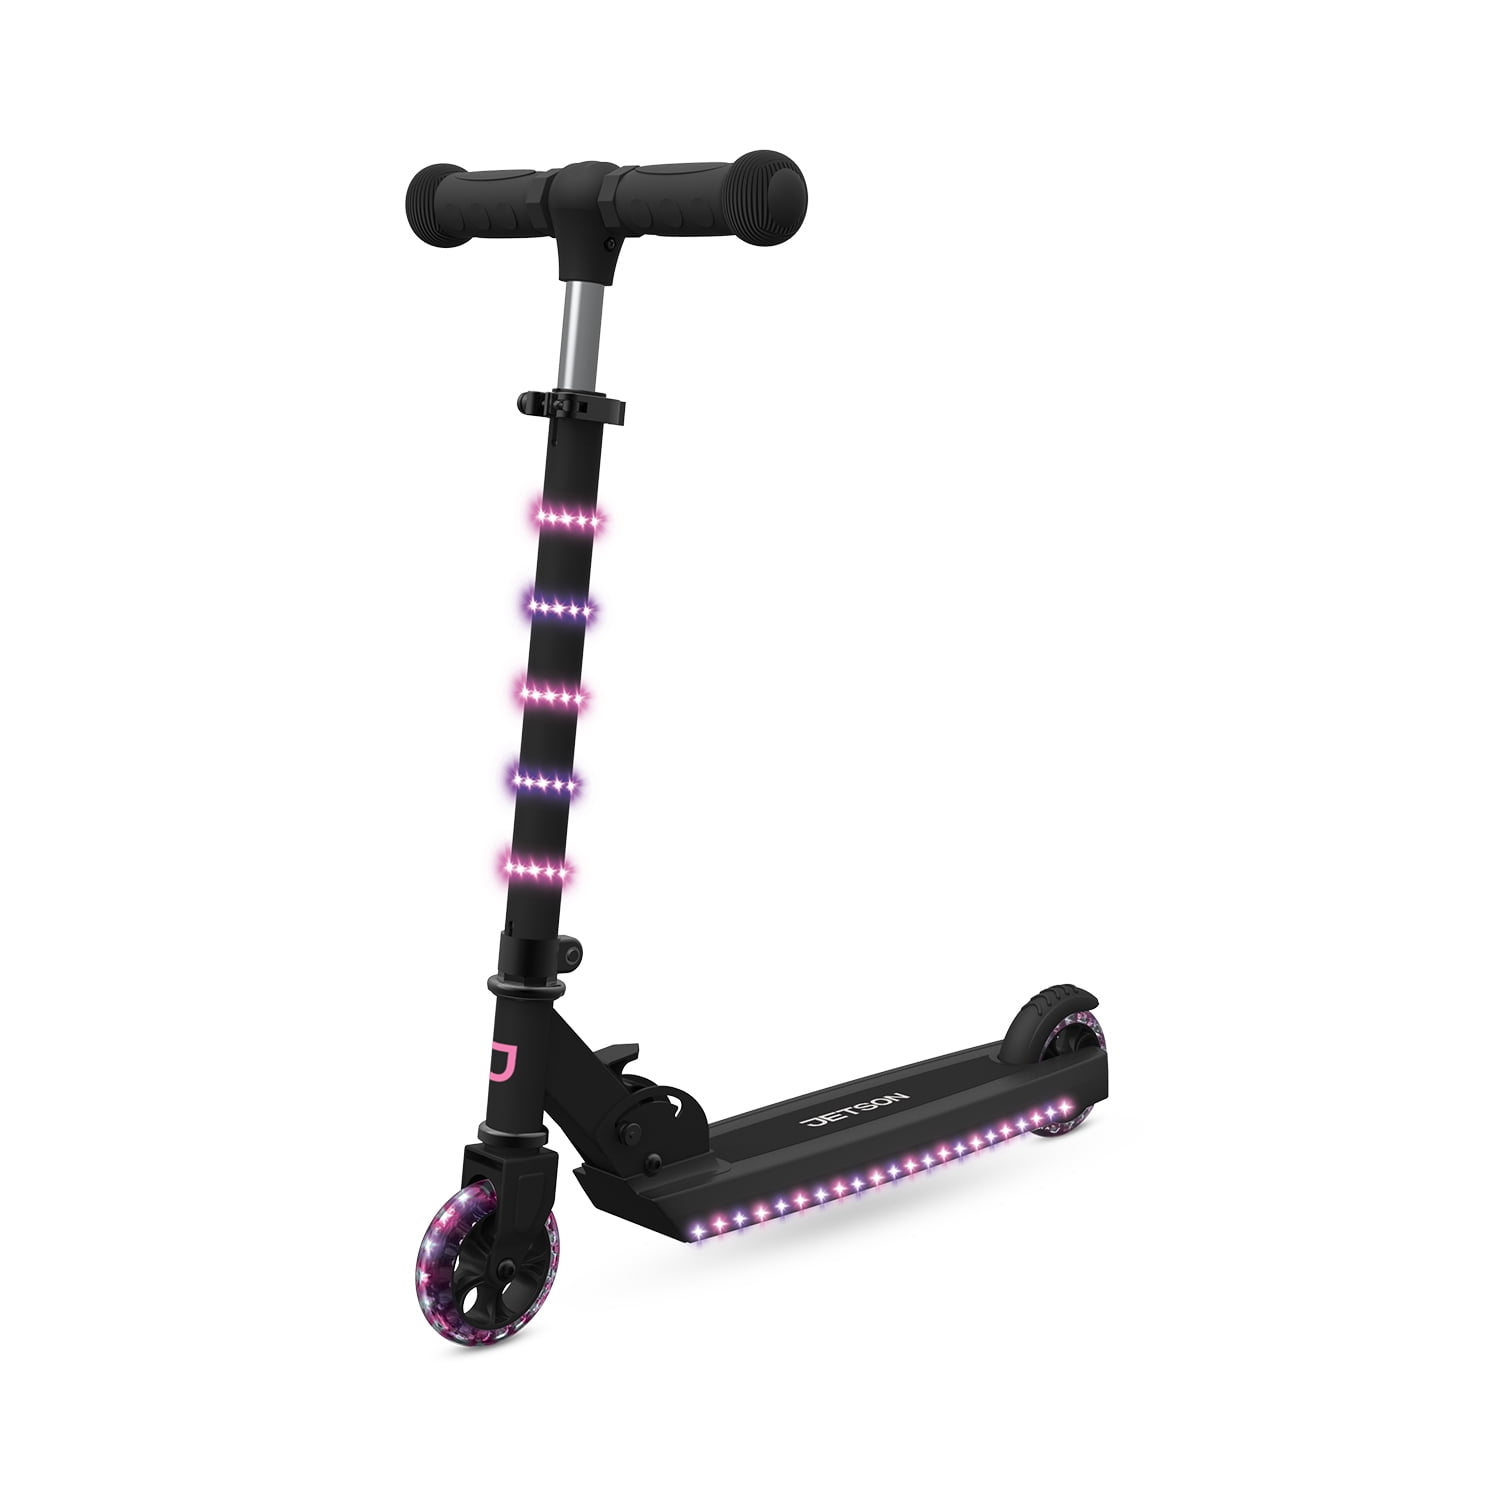 light burst pink and white scooter